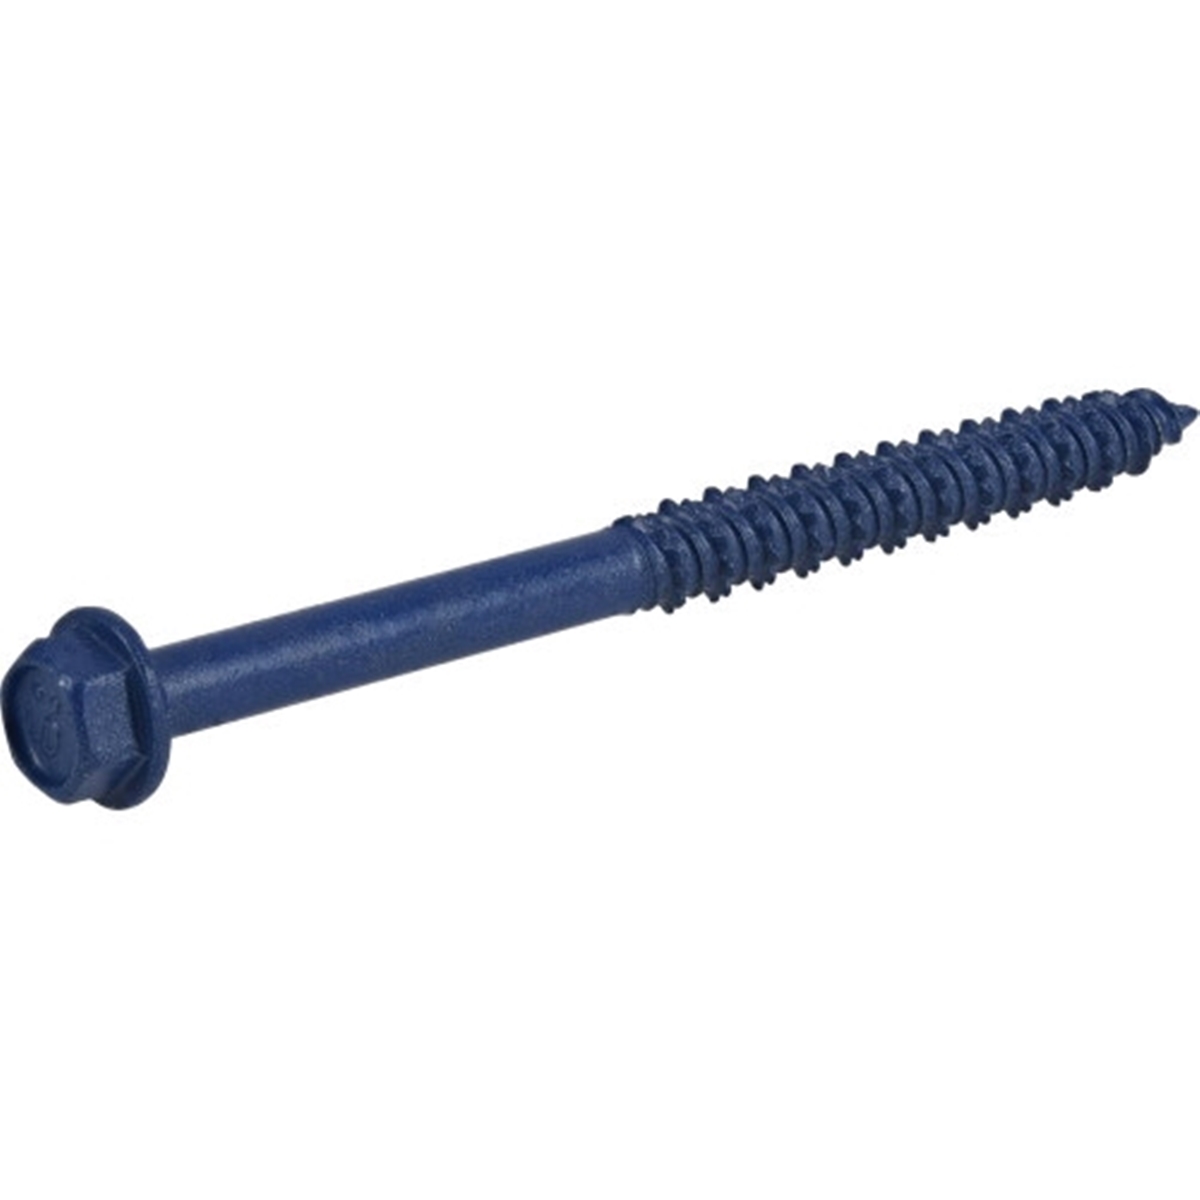 376512 Concrete Screw Anchor, 1/4 in Dia, 3-1/4 in L, Carbon Steel, Epoxy-Coated, 100/PK